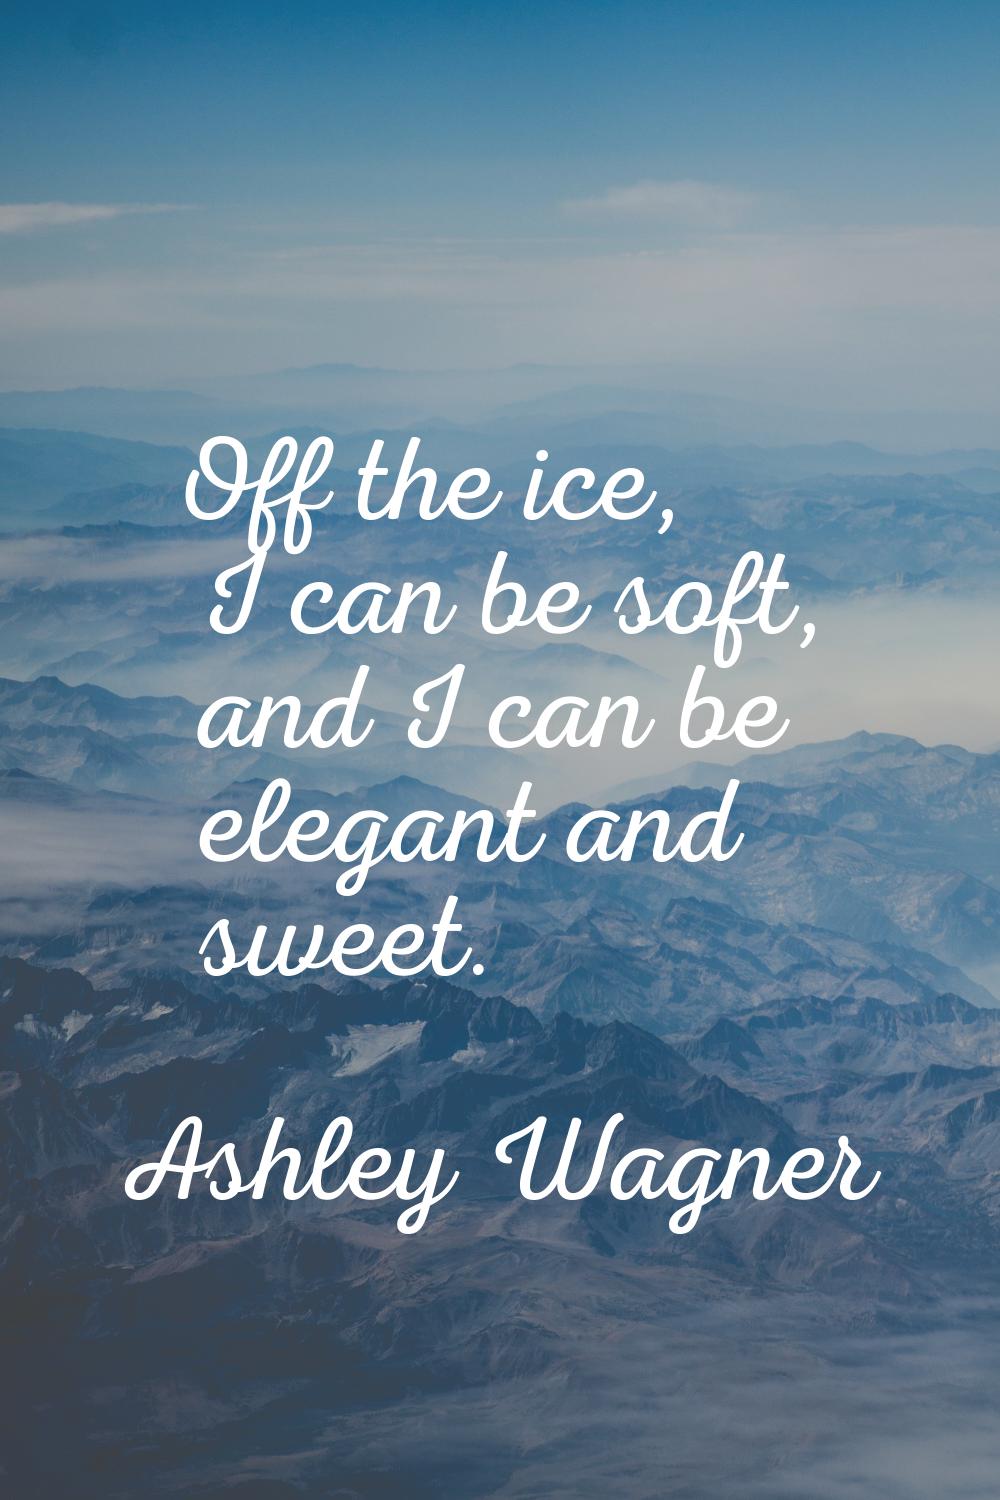 Off the ice, I can be soft, and I can be elegant and sweet.